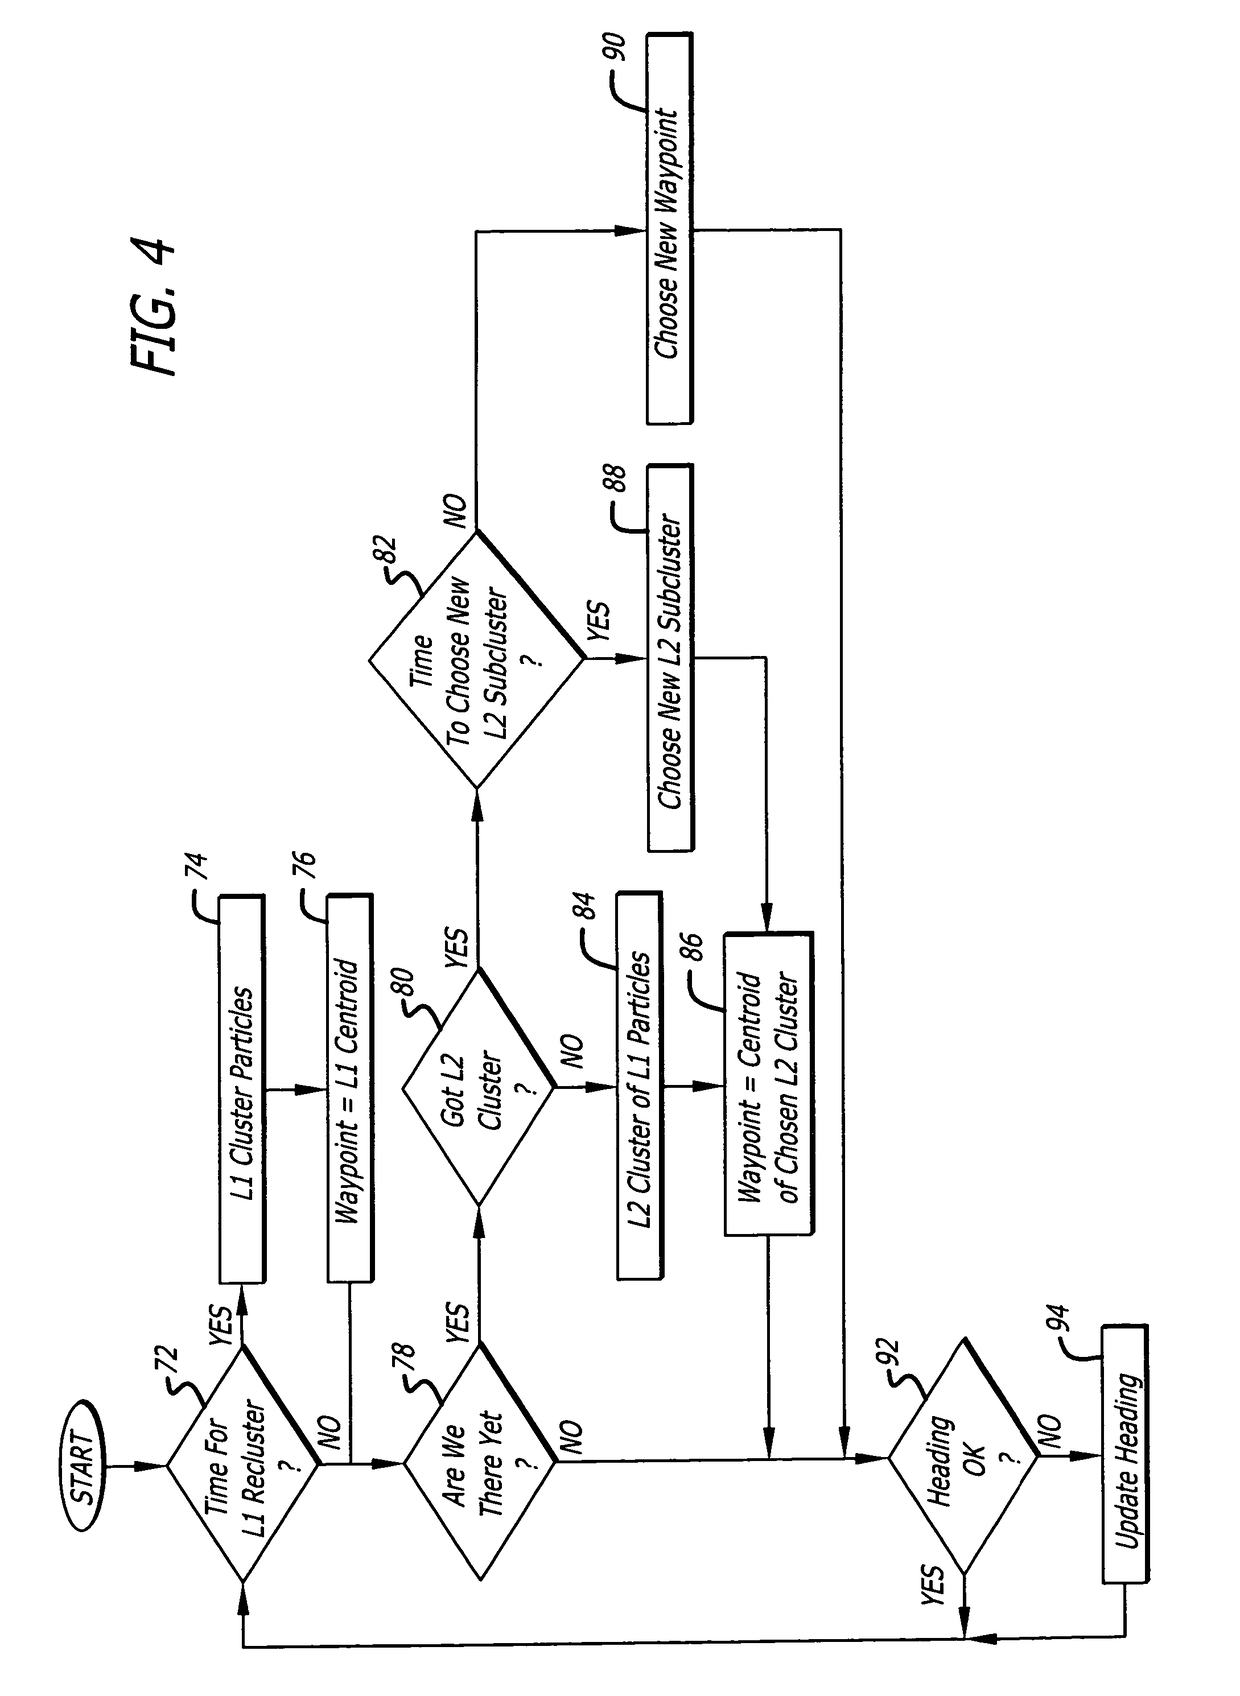 System and method for automated search by distributed elements